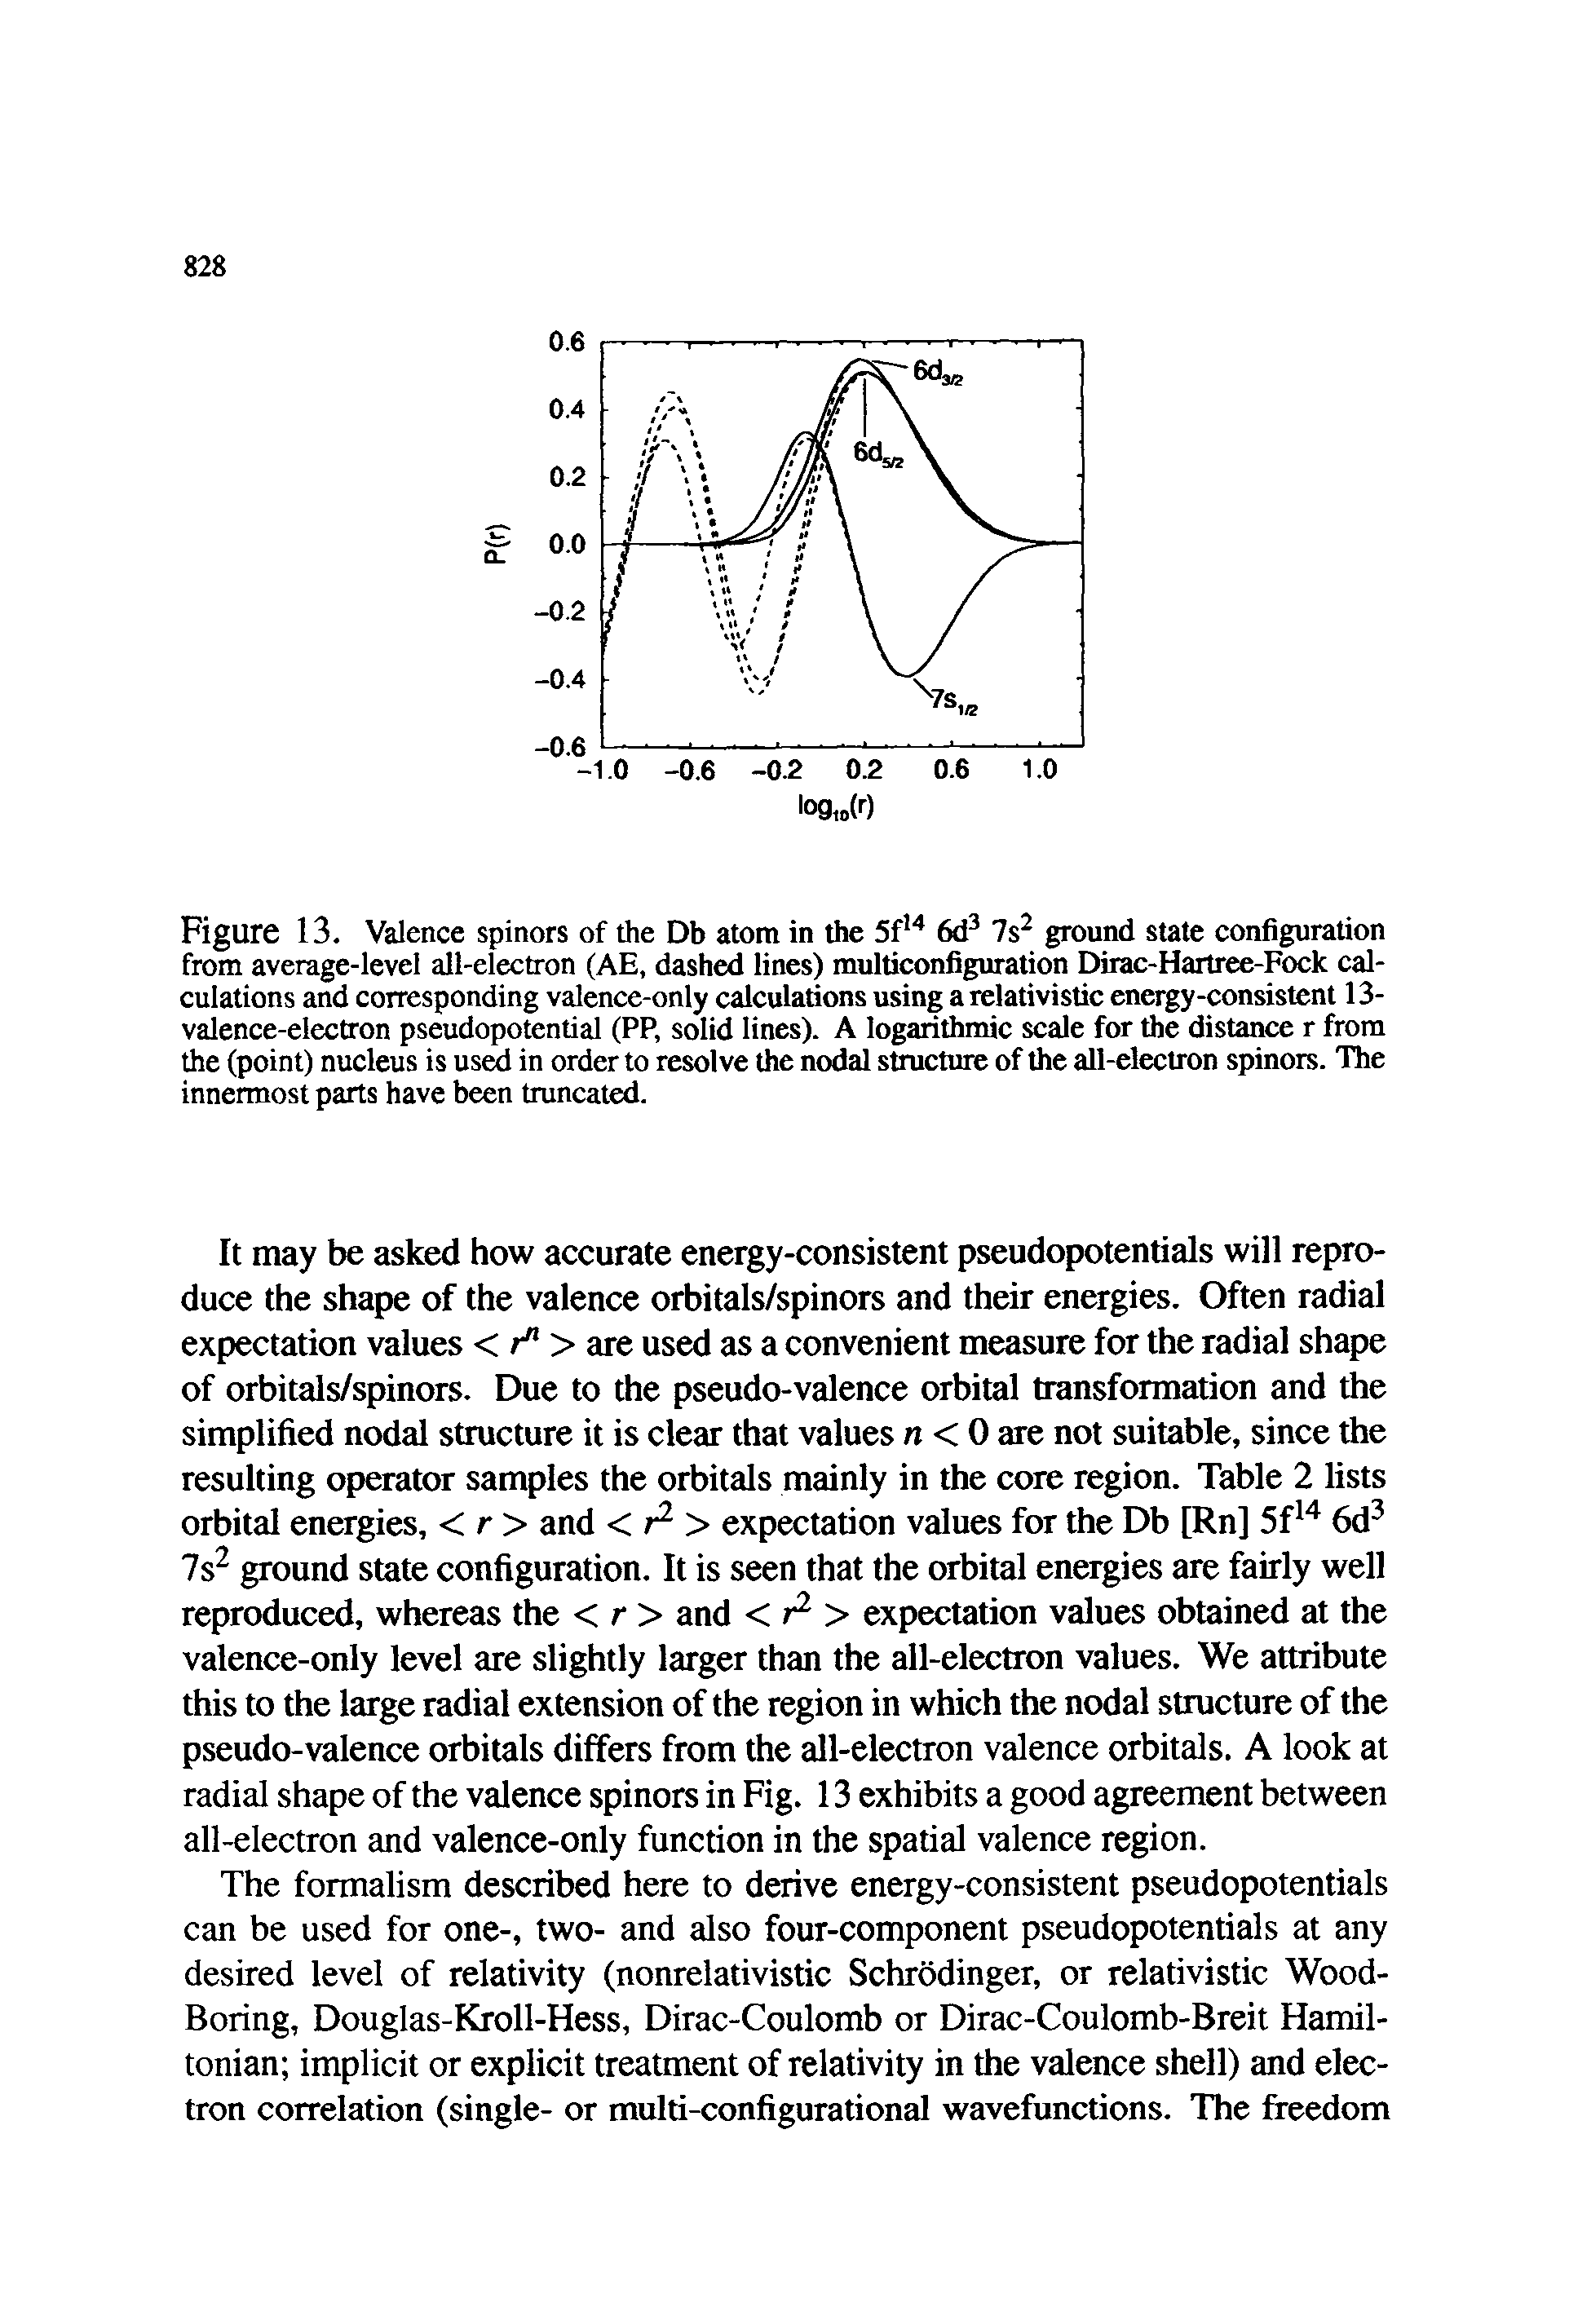 Figure 13. Valence spinors of the Db atom in the 6d 7s ground state configuration from average-level all-electron (AE, dashed lines) multiconfiguration Dirac-Hartree-Fock calculations and corresponding valence-only calculations using a relativistic energy-consistent 13-valence-electron pseudopotential (PP, solid lines). A logarithmic scale for the distance r from the (point) nucleus is us in order to resolve the nodal structure of the all-electron spinors. The innermost parts have been truncated.